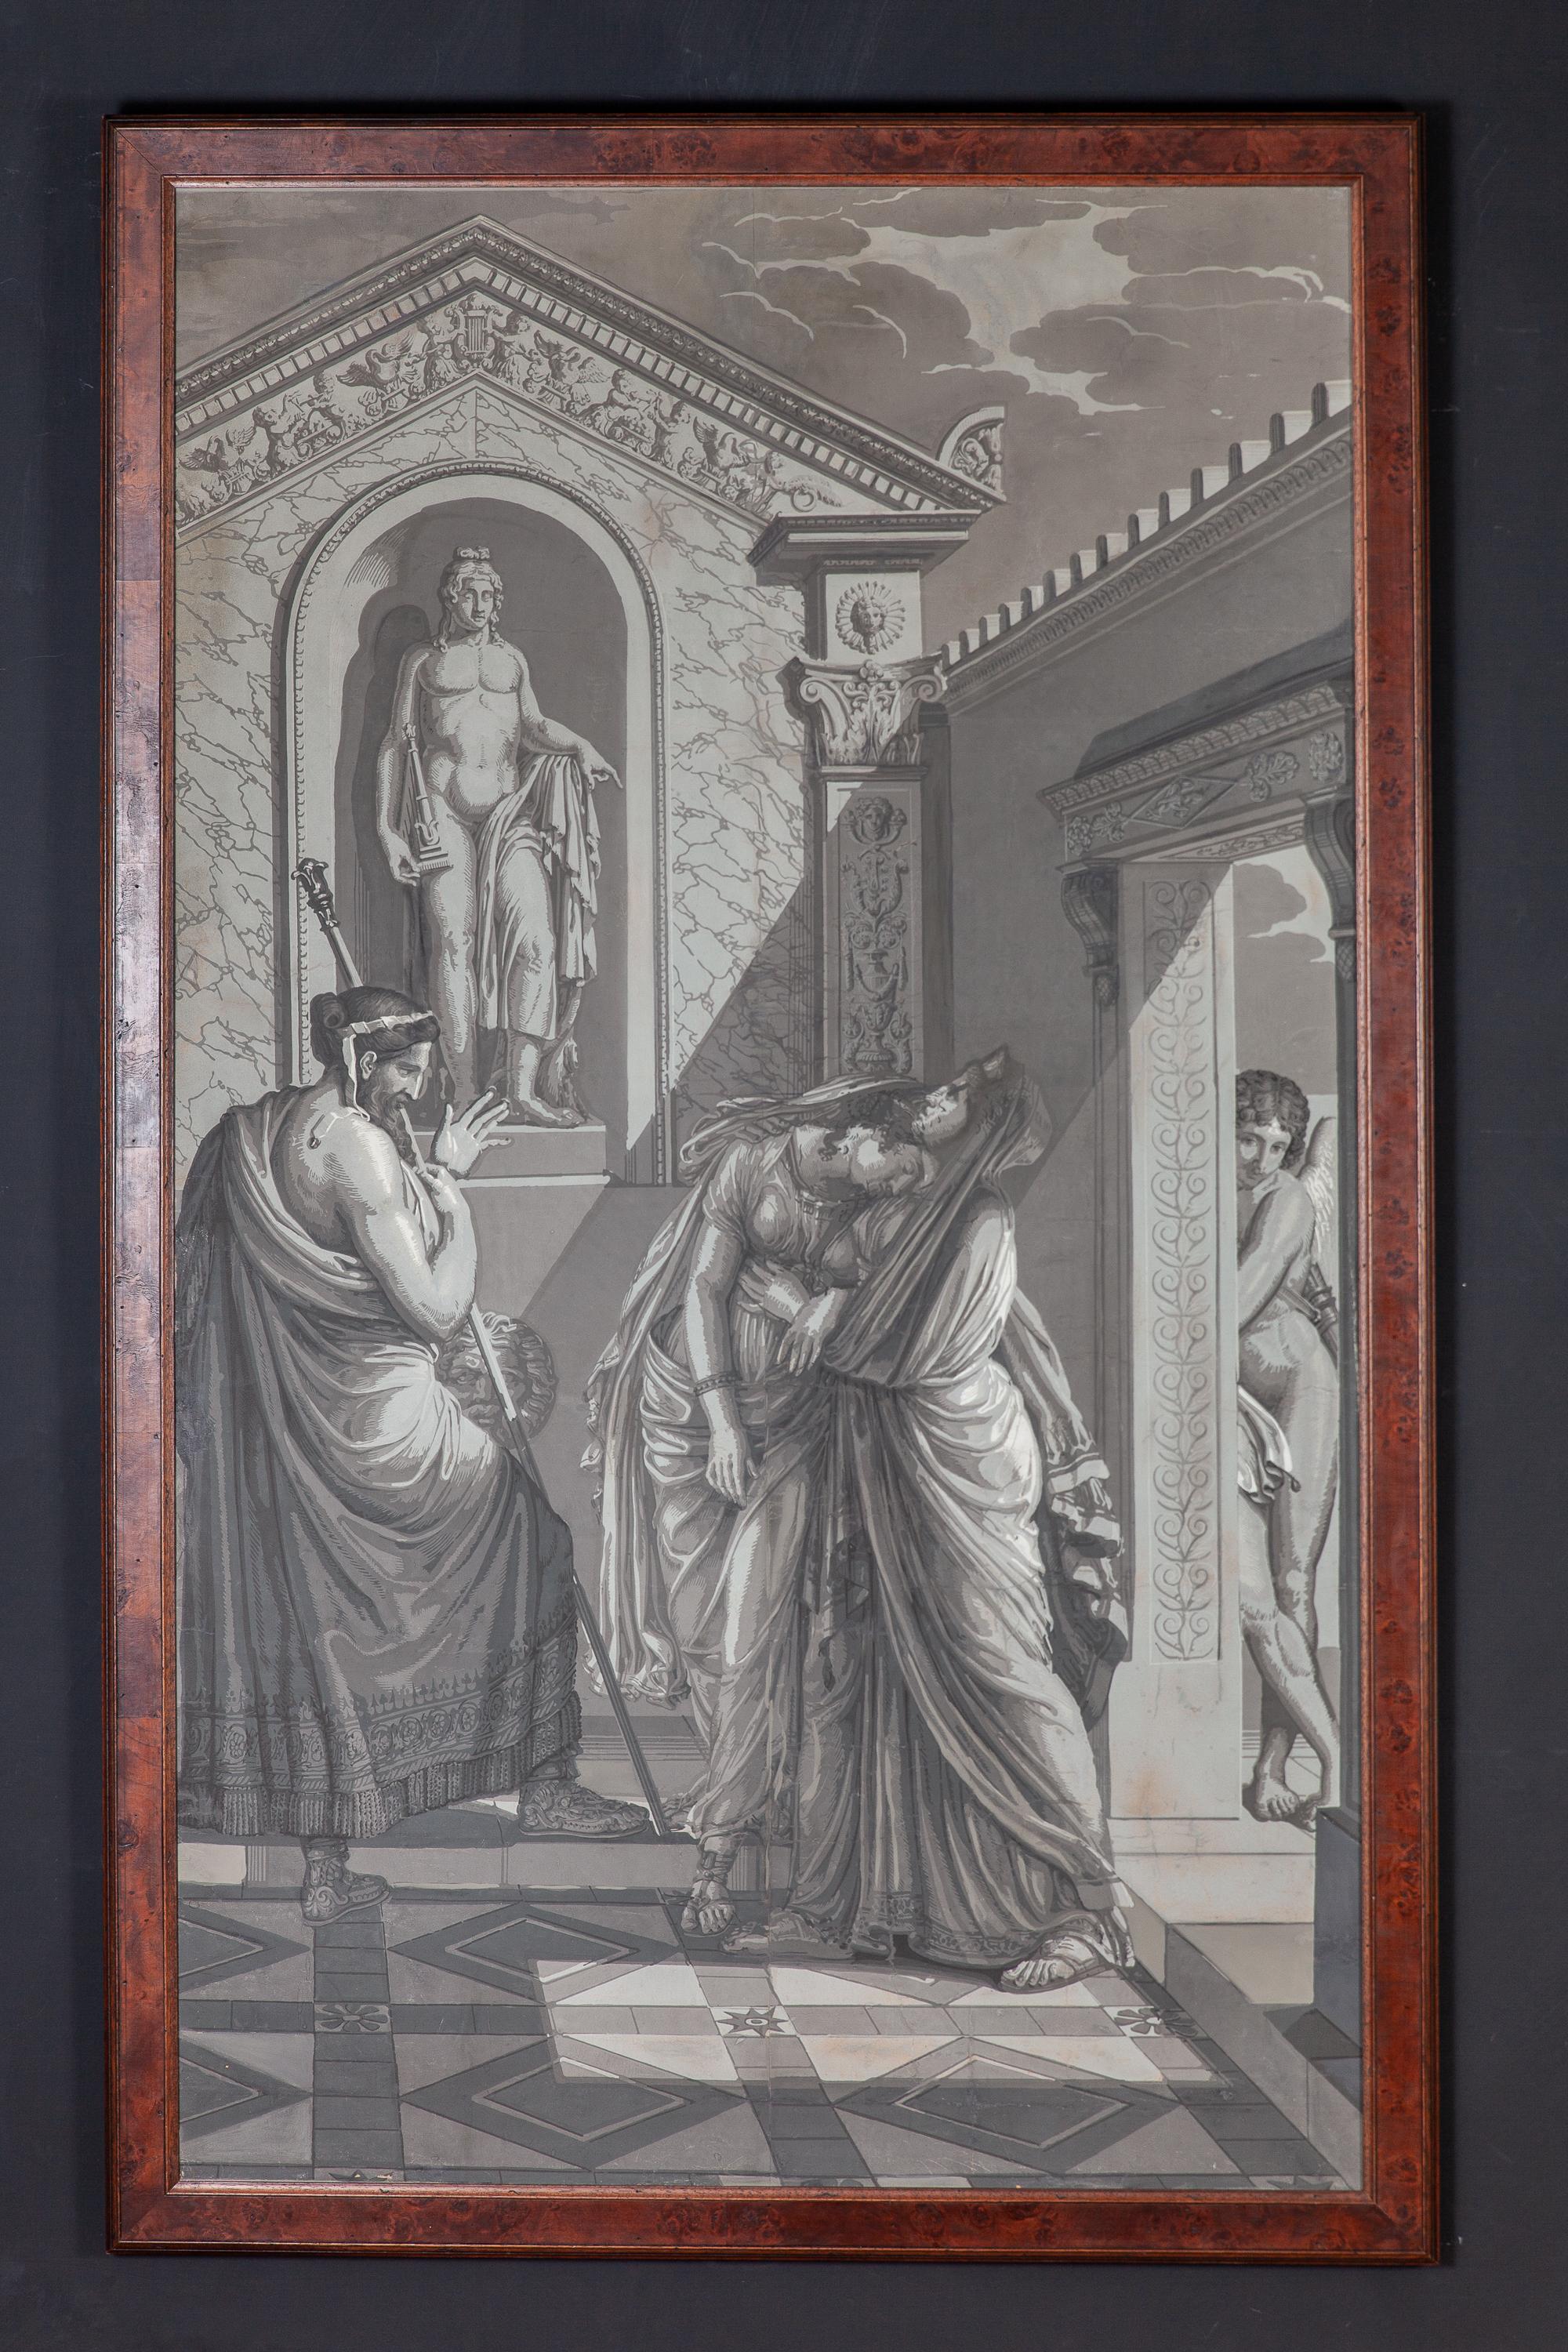 Unknown Figurative Painting - A Pair of  Wall Decoration 'En Grisaille' by Dufour, Paris, France, 19th Century